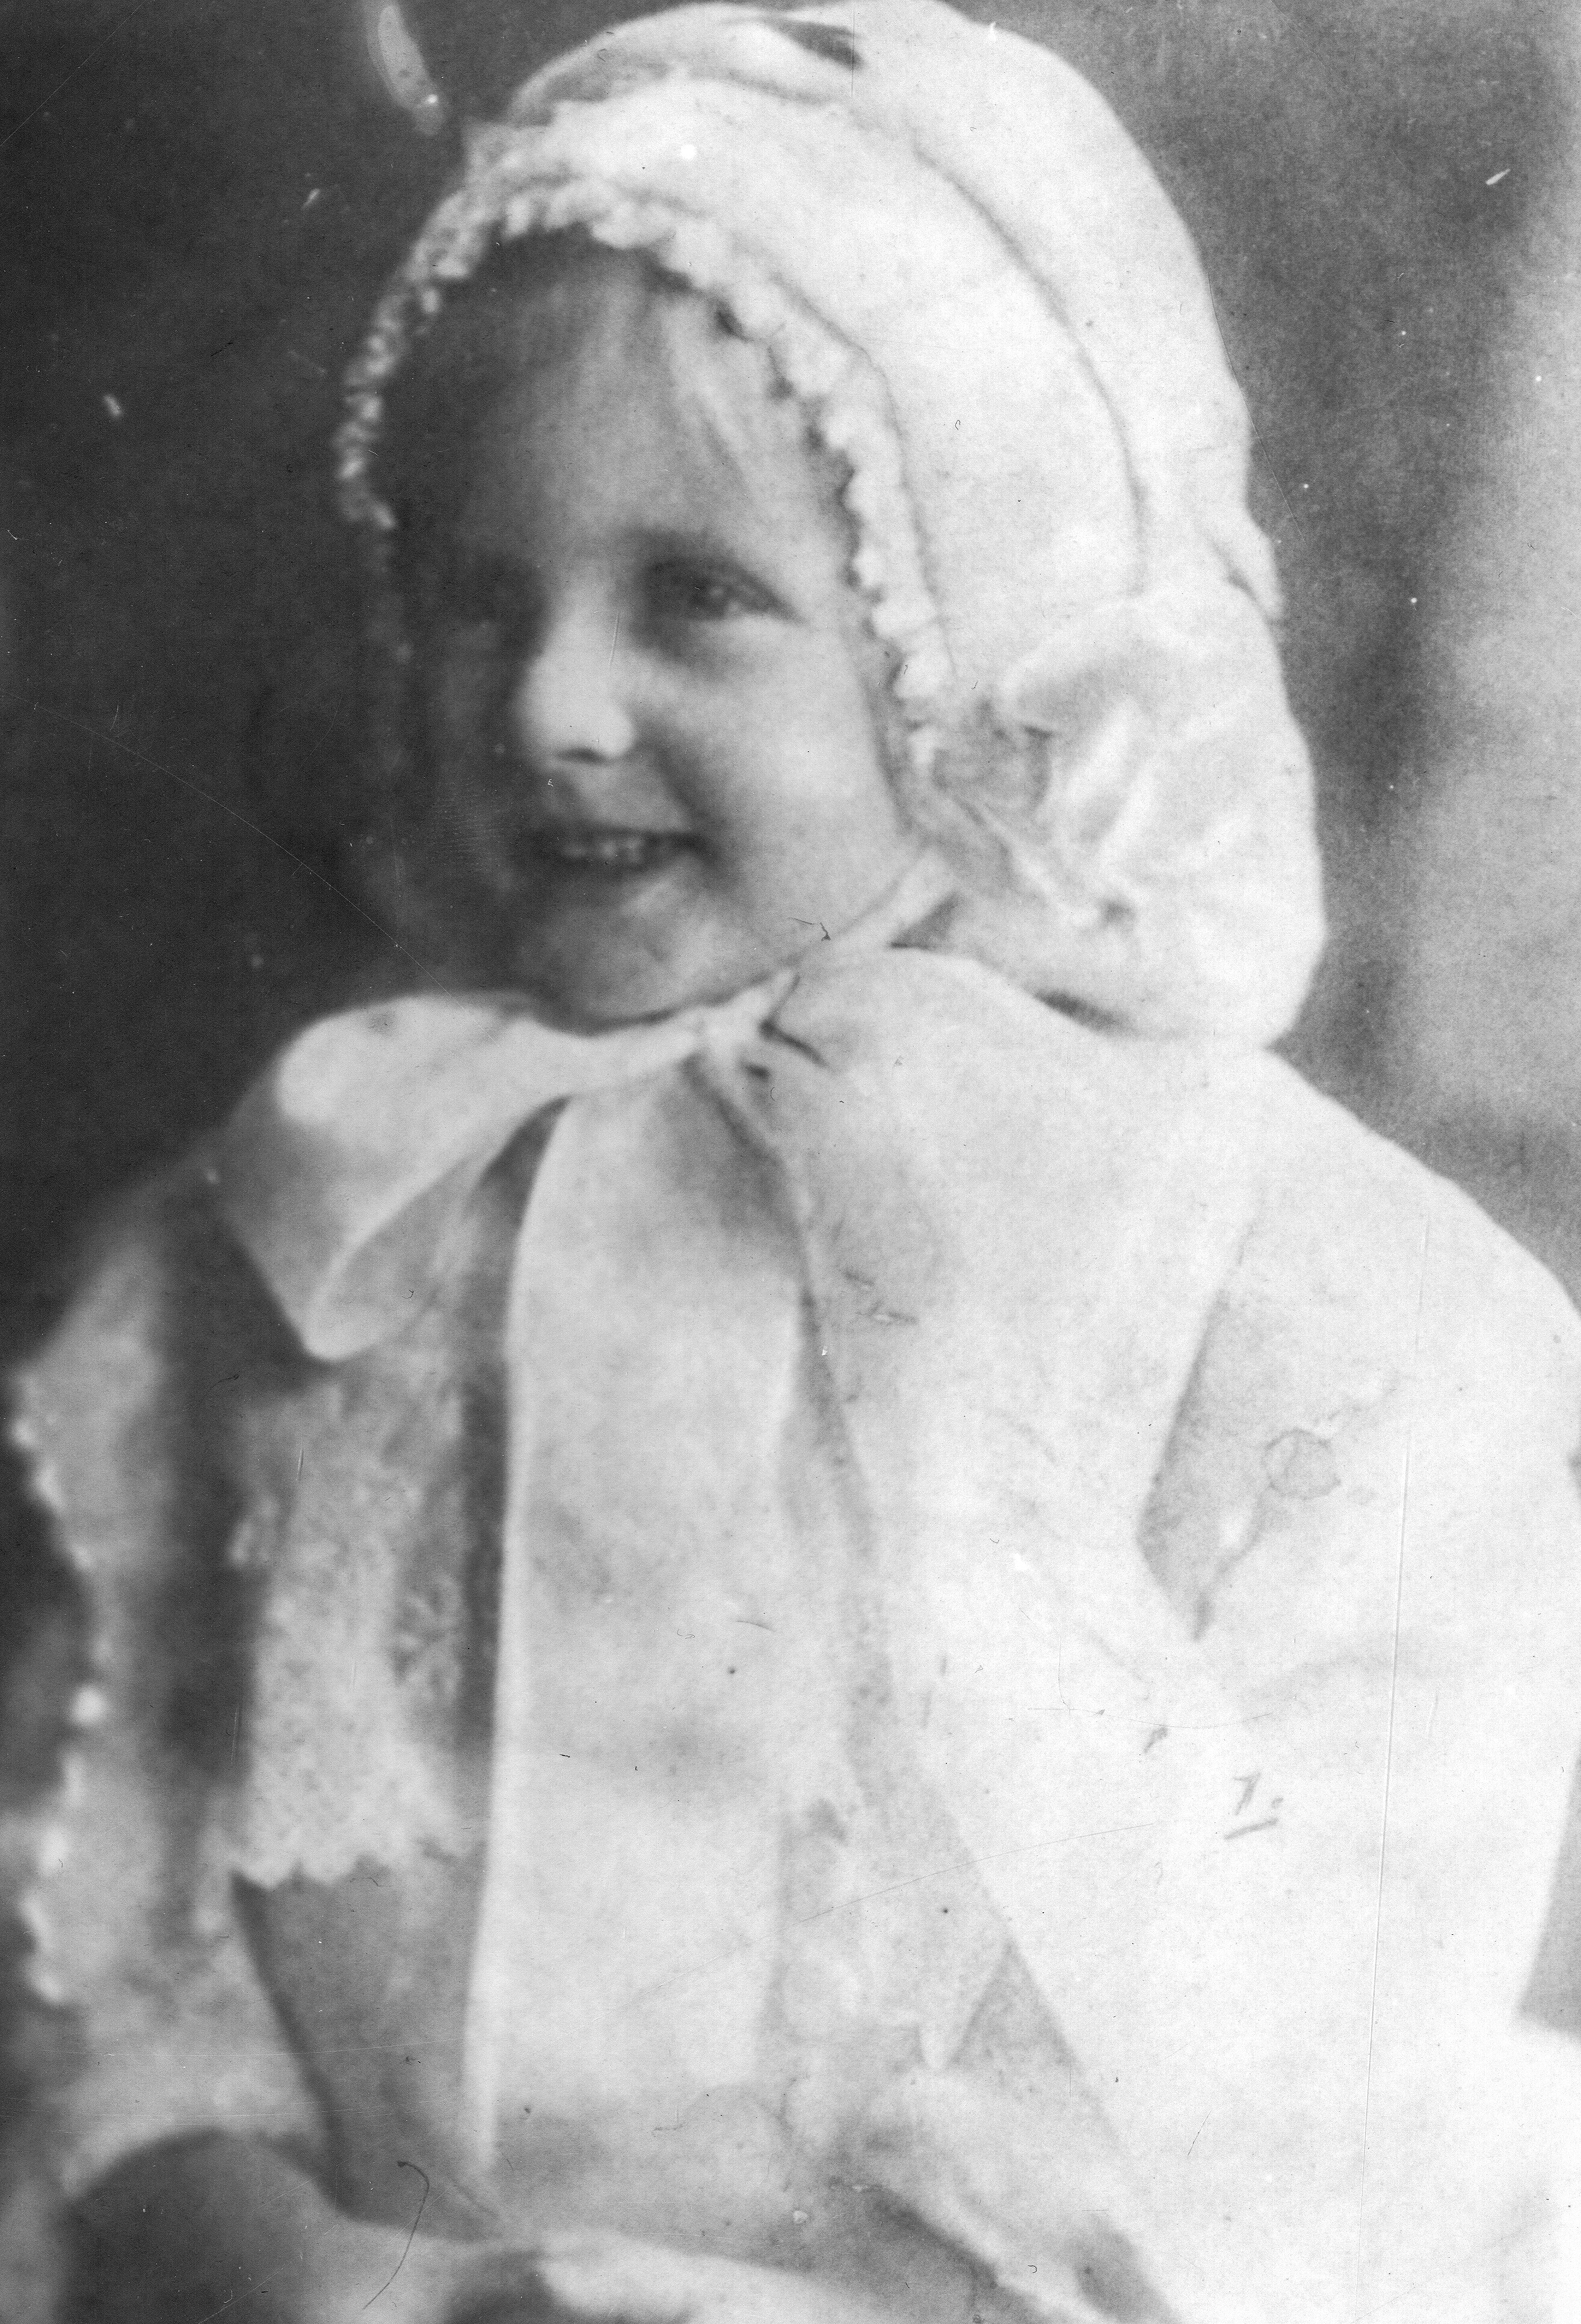 Black and white archival photograph of a girl wearing a white bonnet tied in a bow under her chin and a white dress.